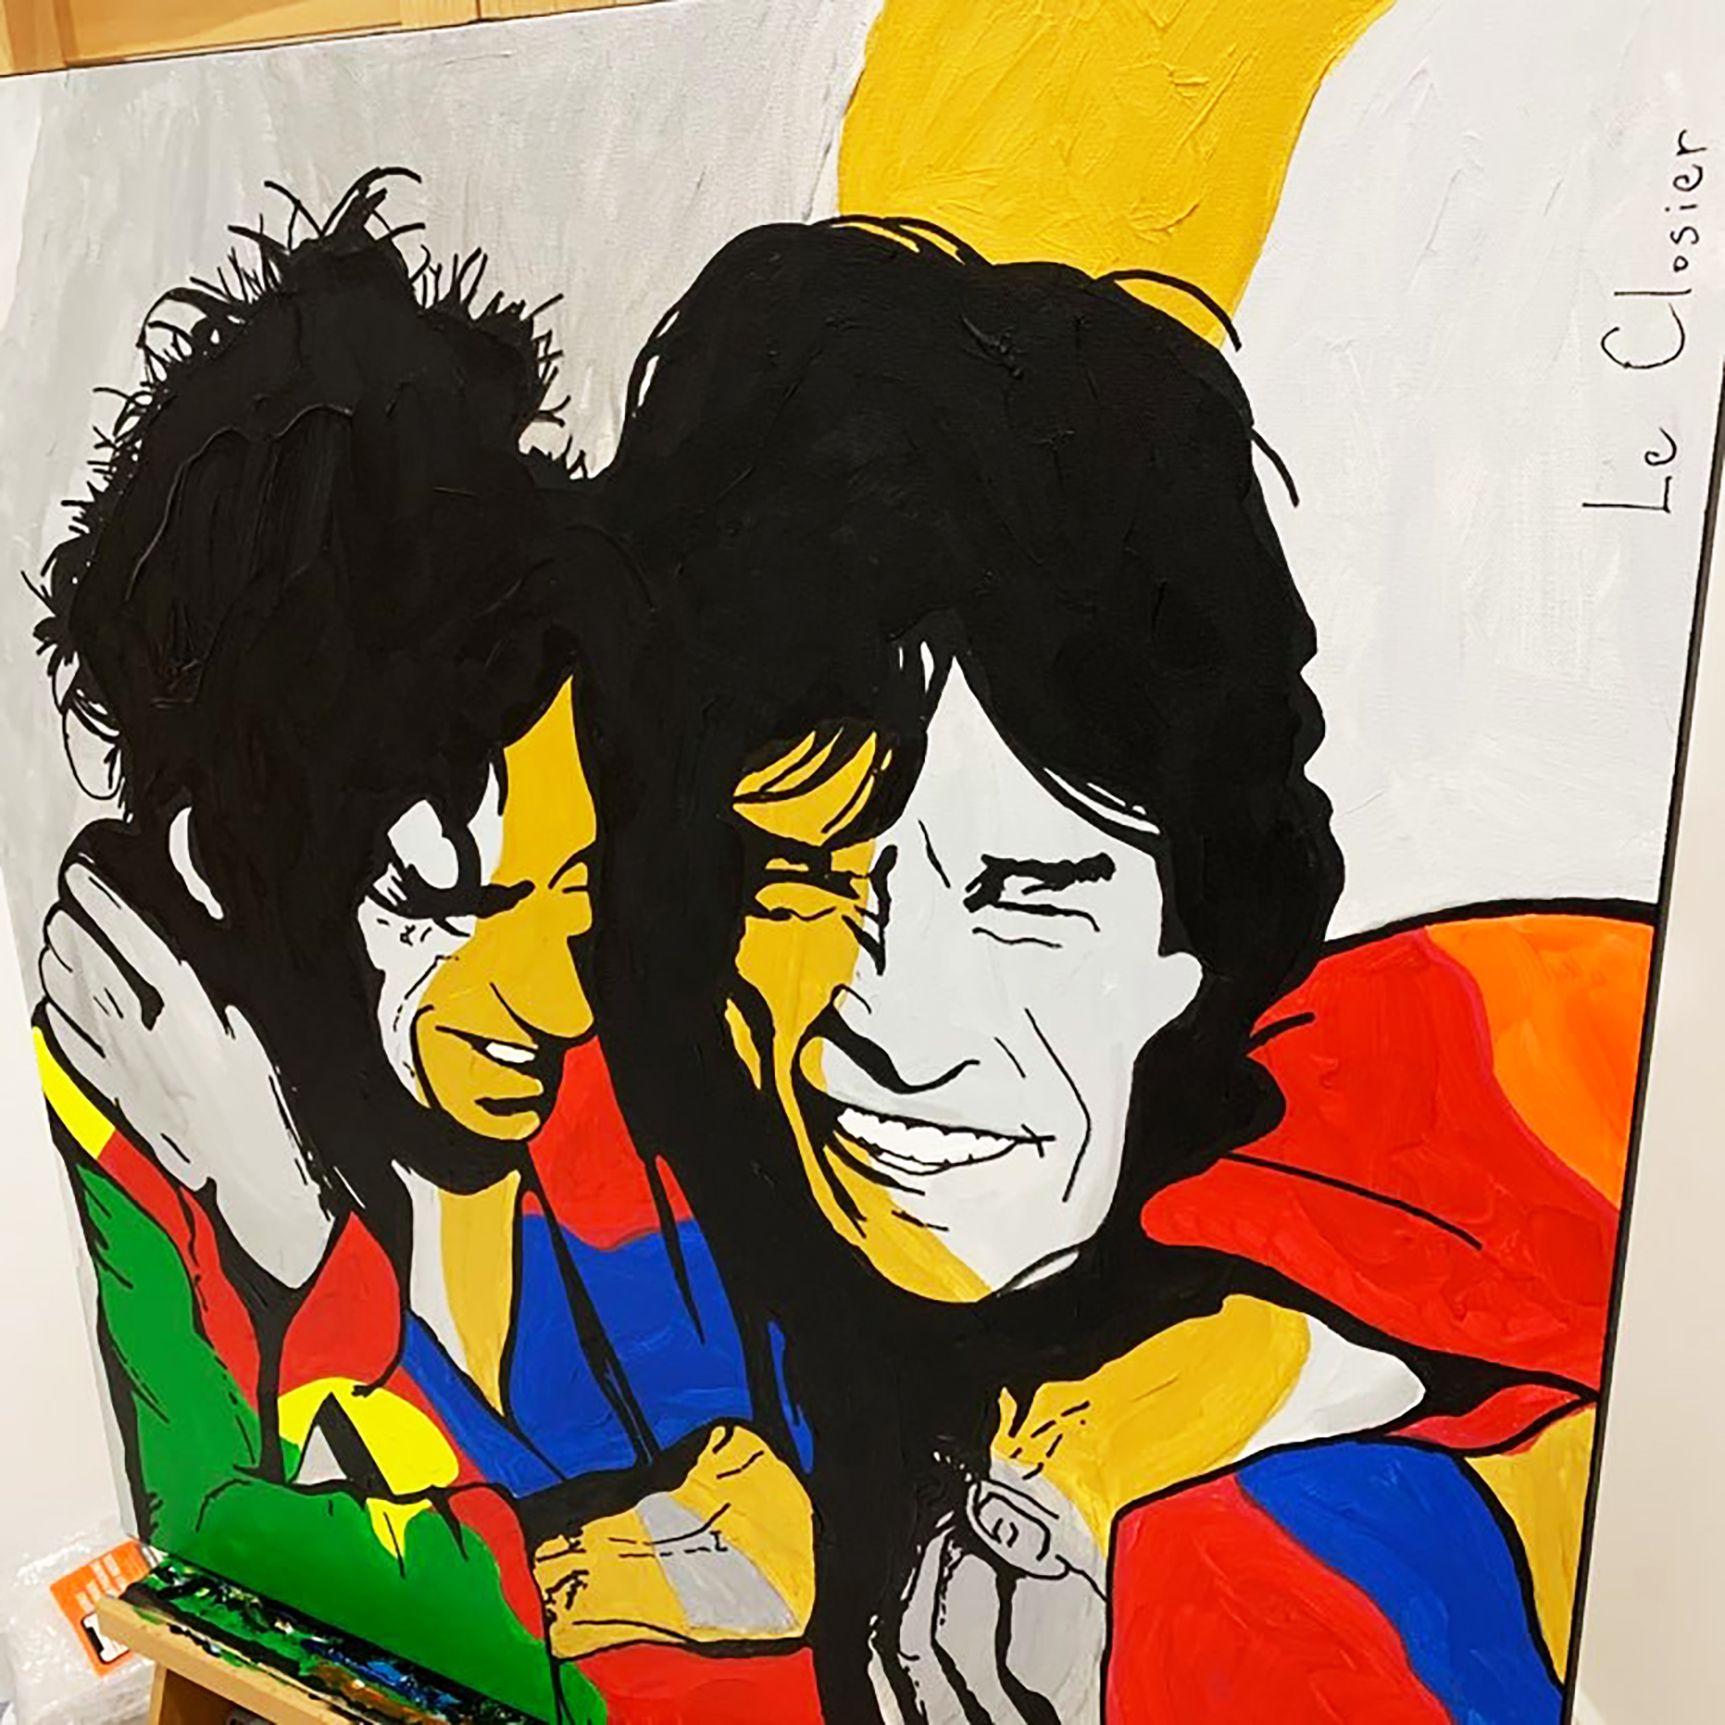 MICK AND KEITH, Painting, Acrylic on Canvas 2